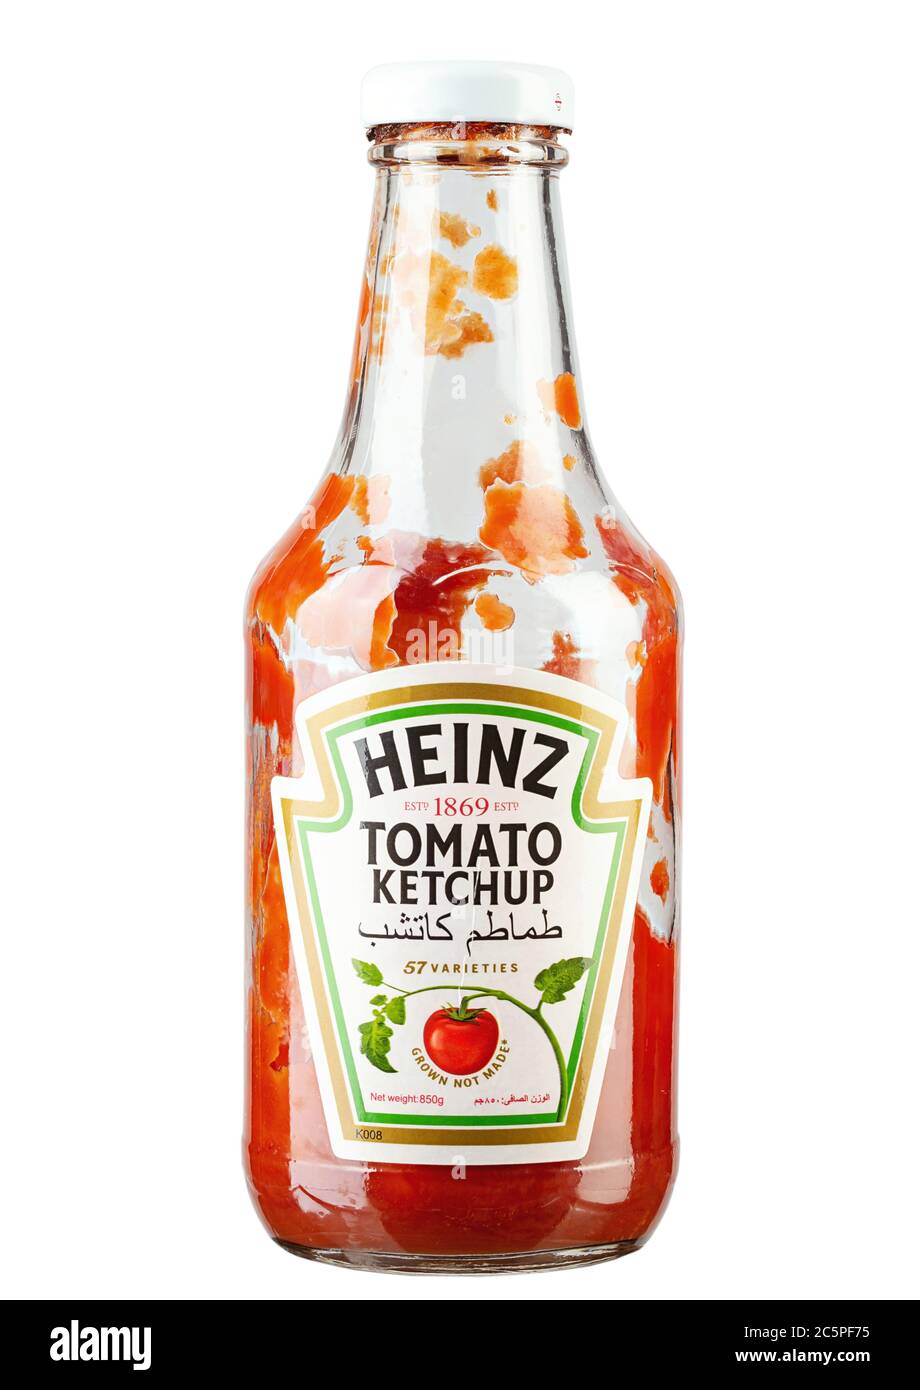 Ukraine, Kyiv - June 02. 2020:  Bottle of Heinz Ketchup isolated on white background. Used ketchup bottle. File contains clipping path. Stock Photo